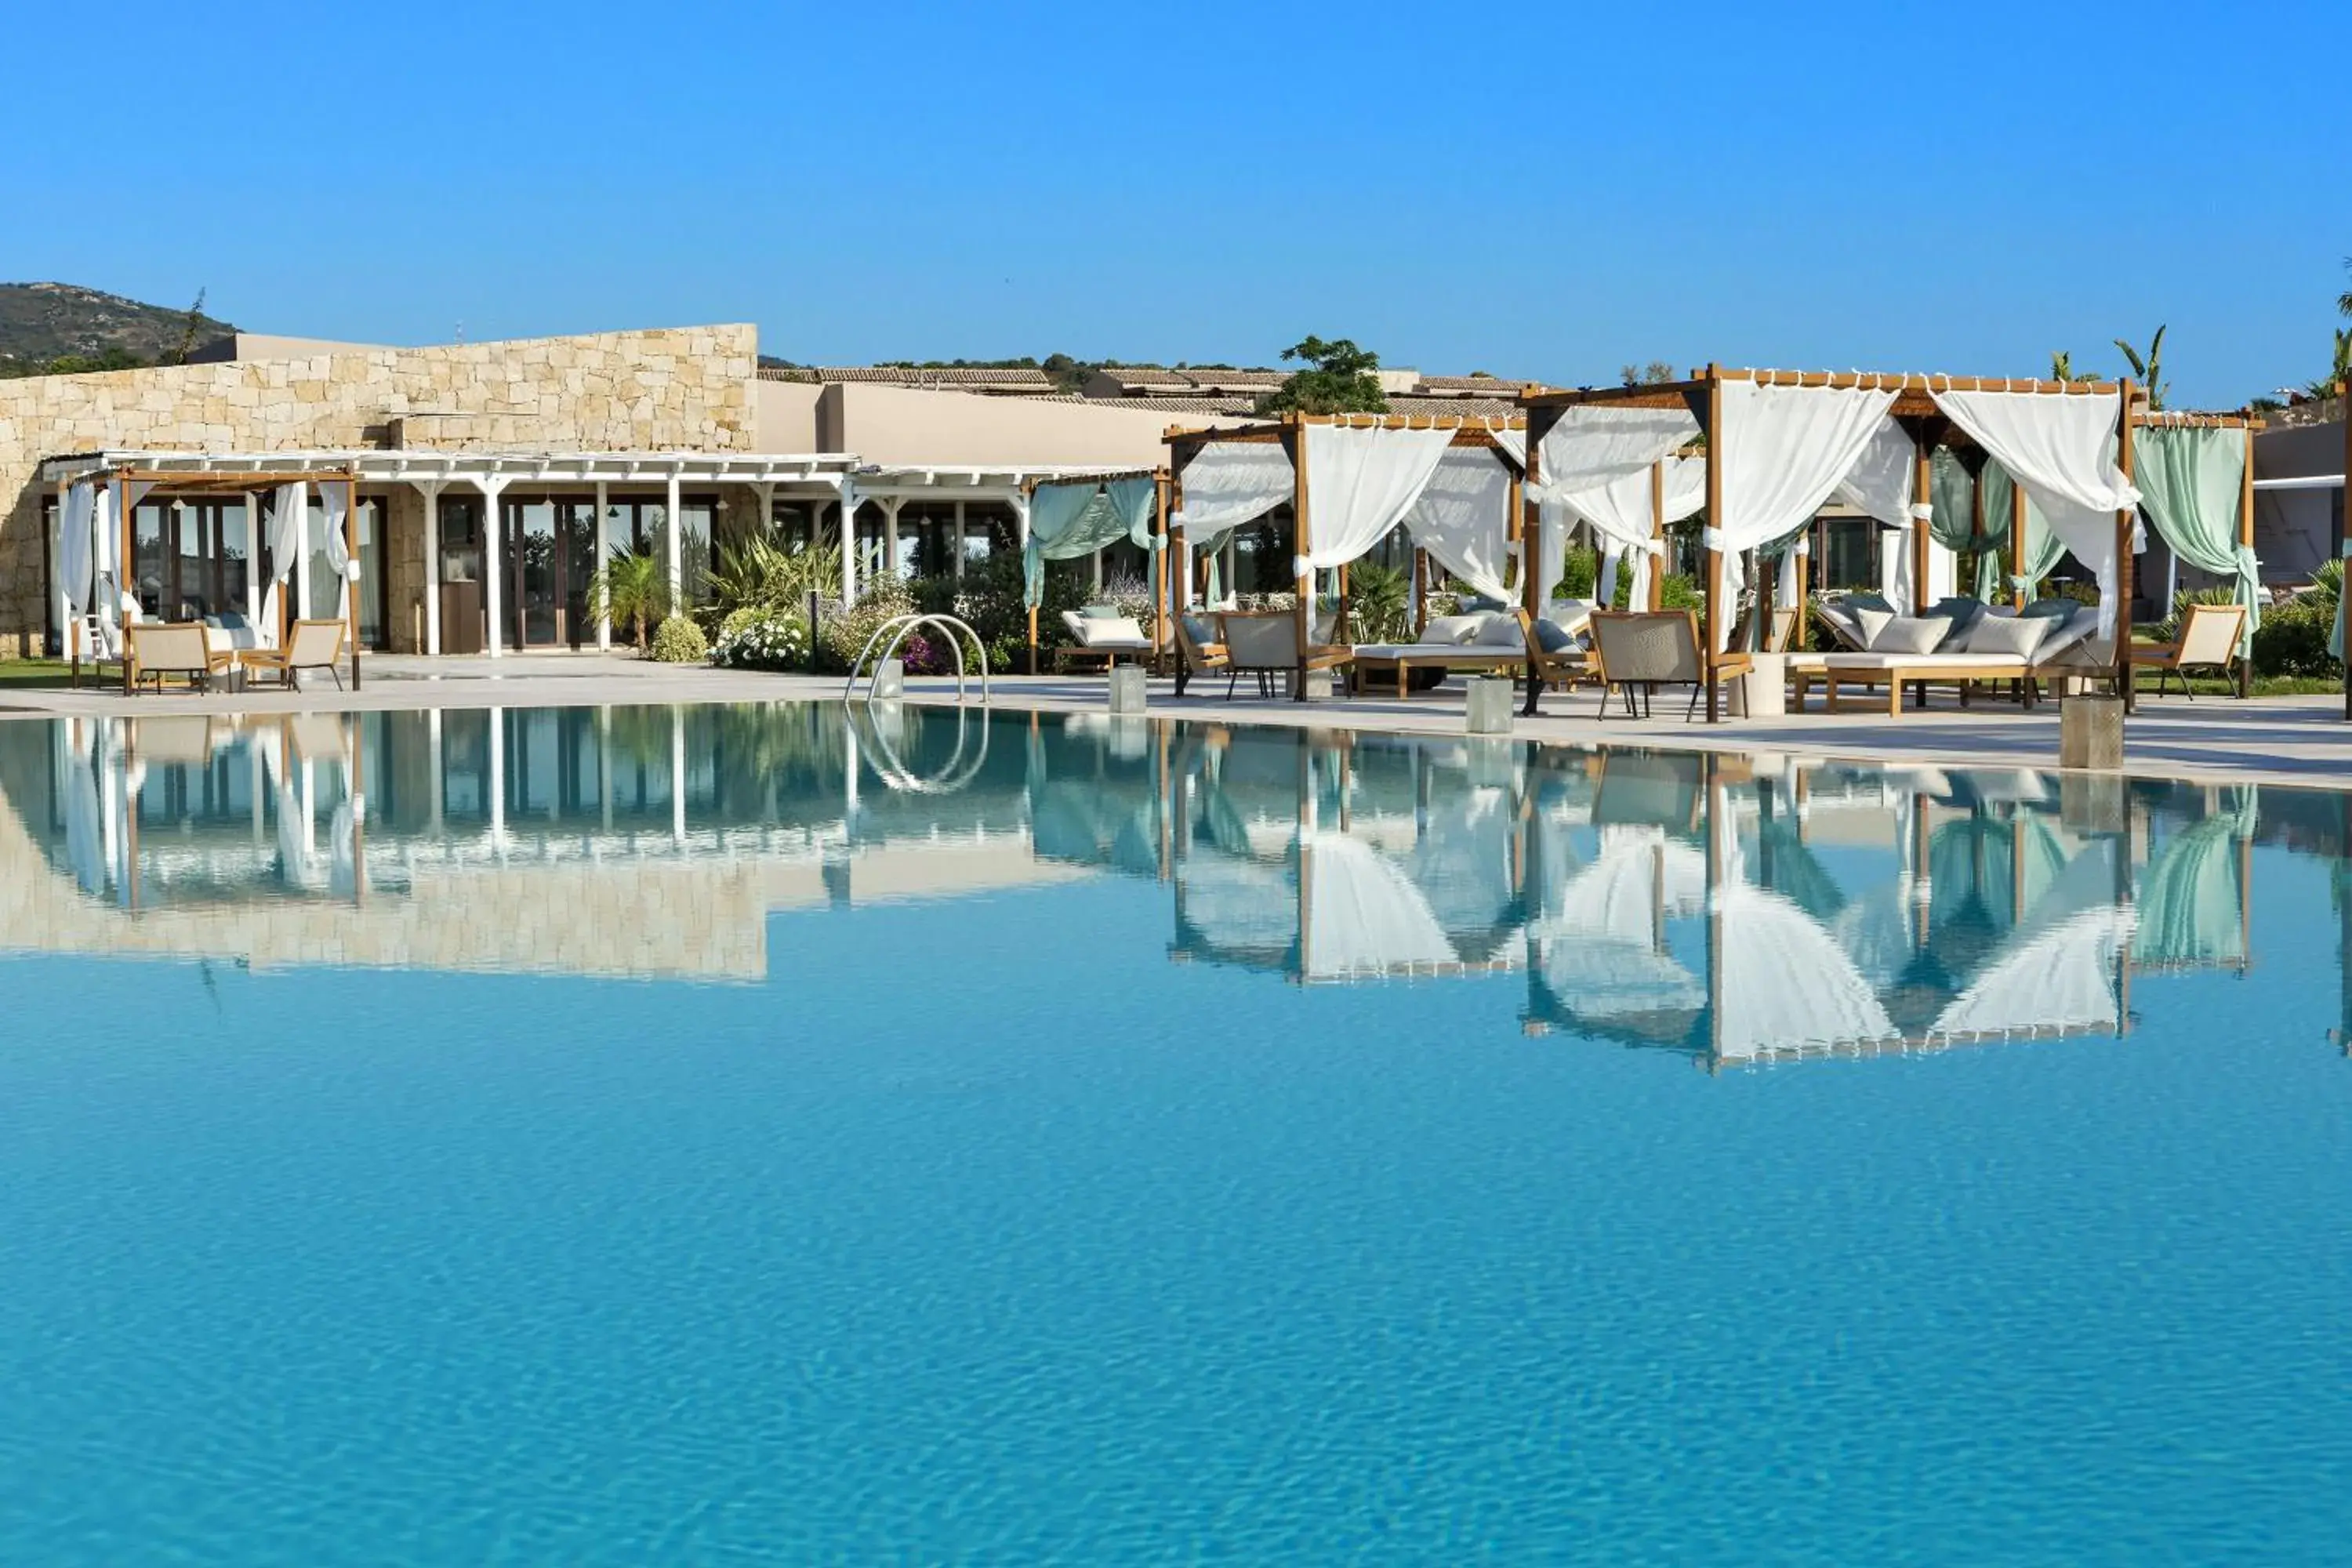 Swimming Pool in Baglioni Resort Sardinia - The Leading Hotels of the World